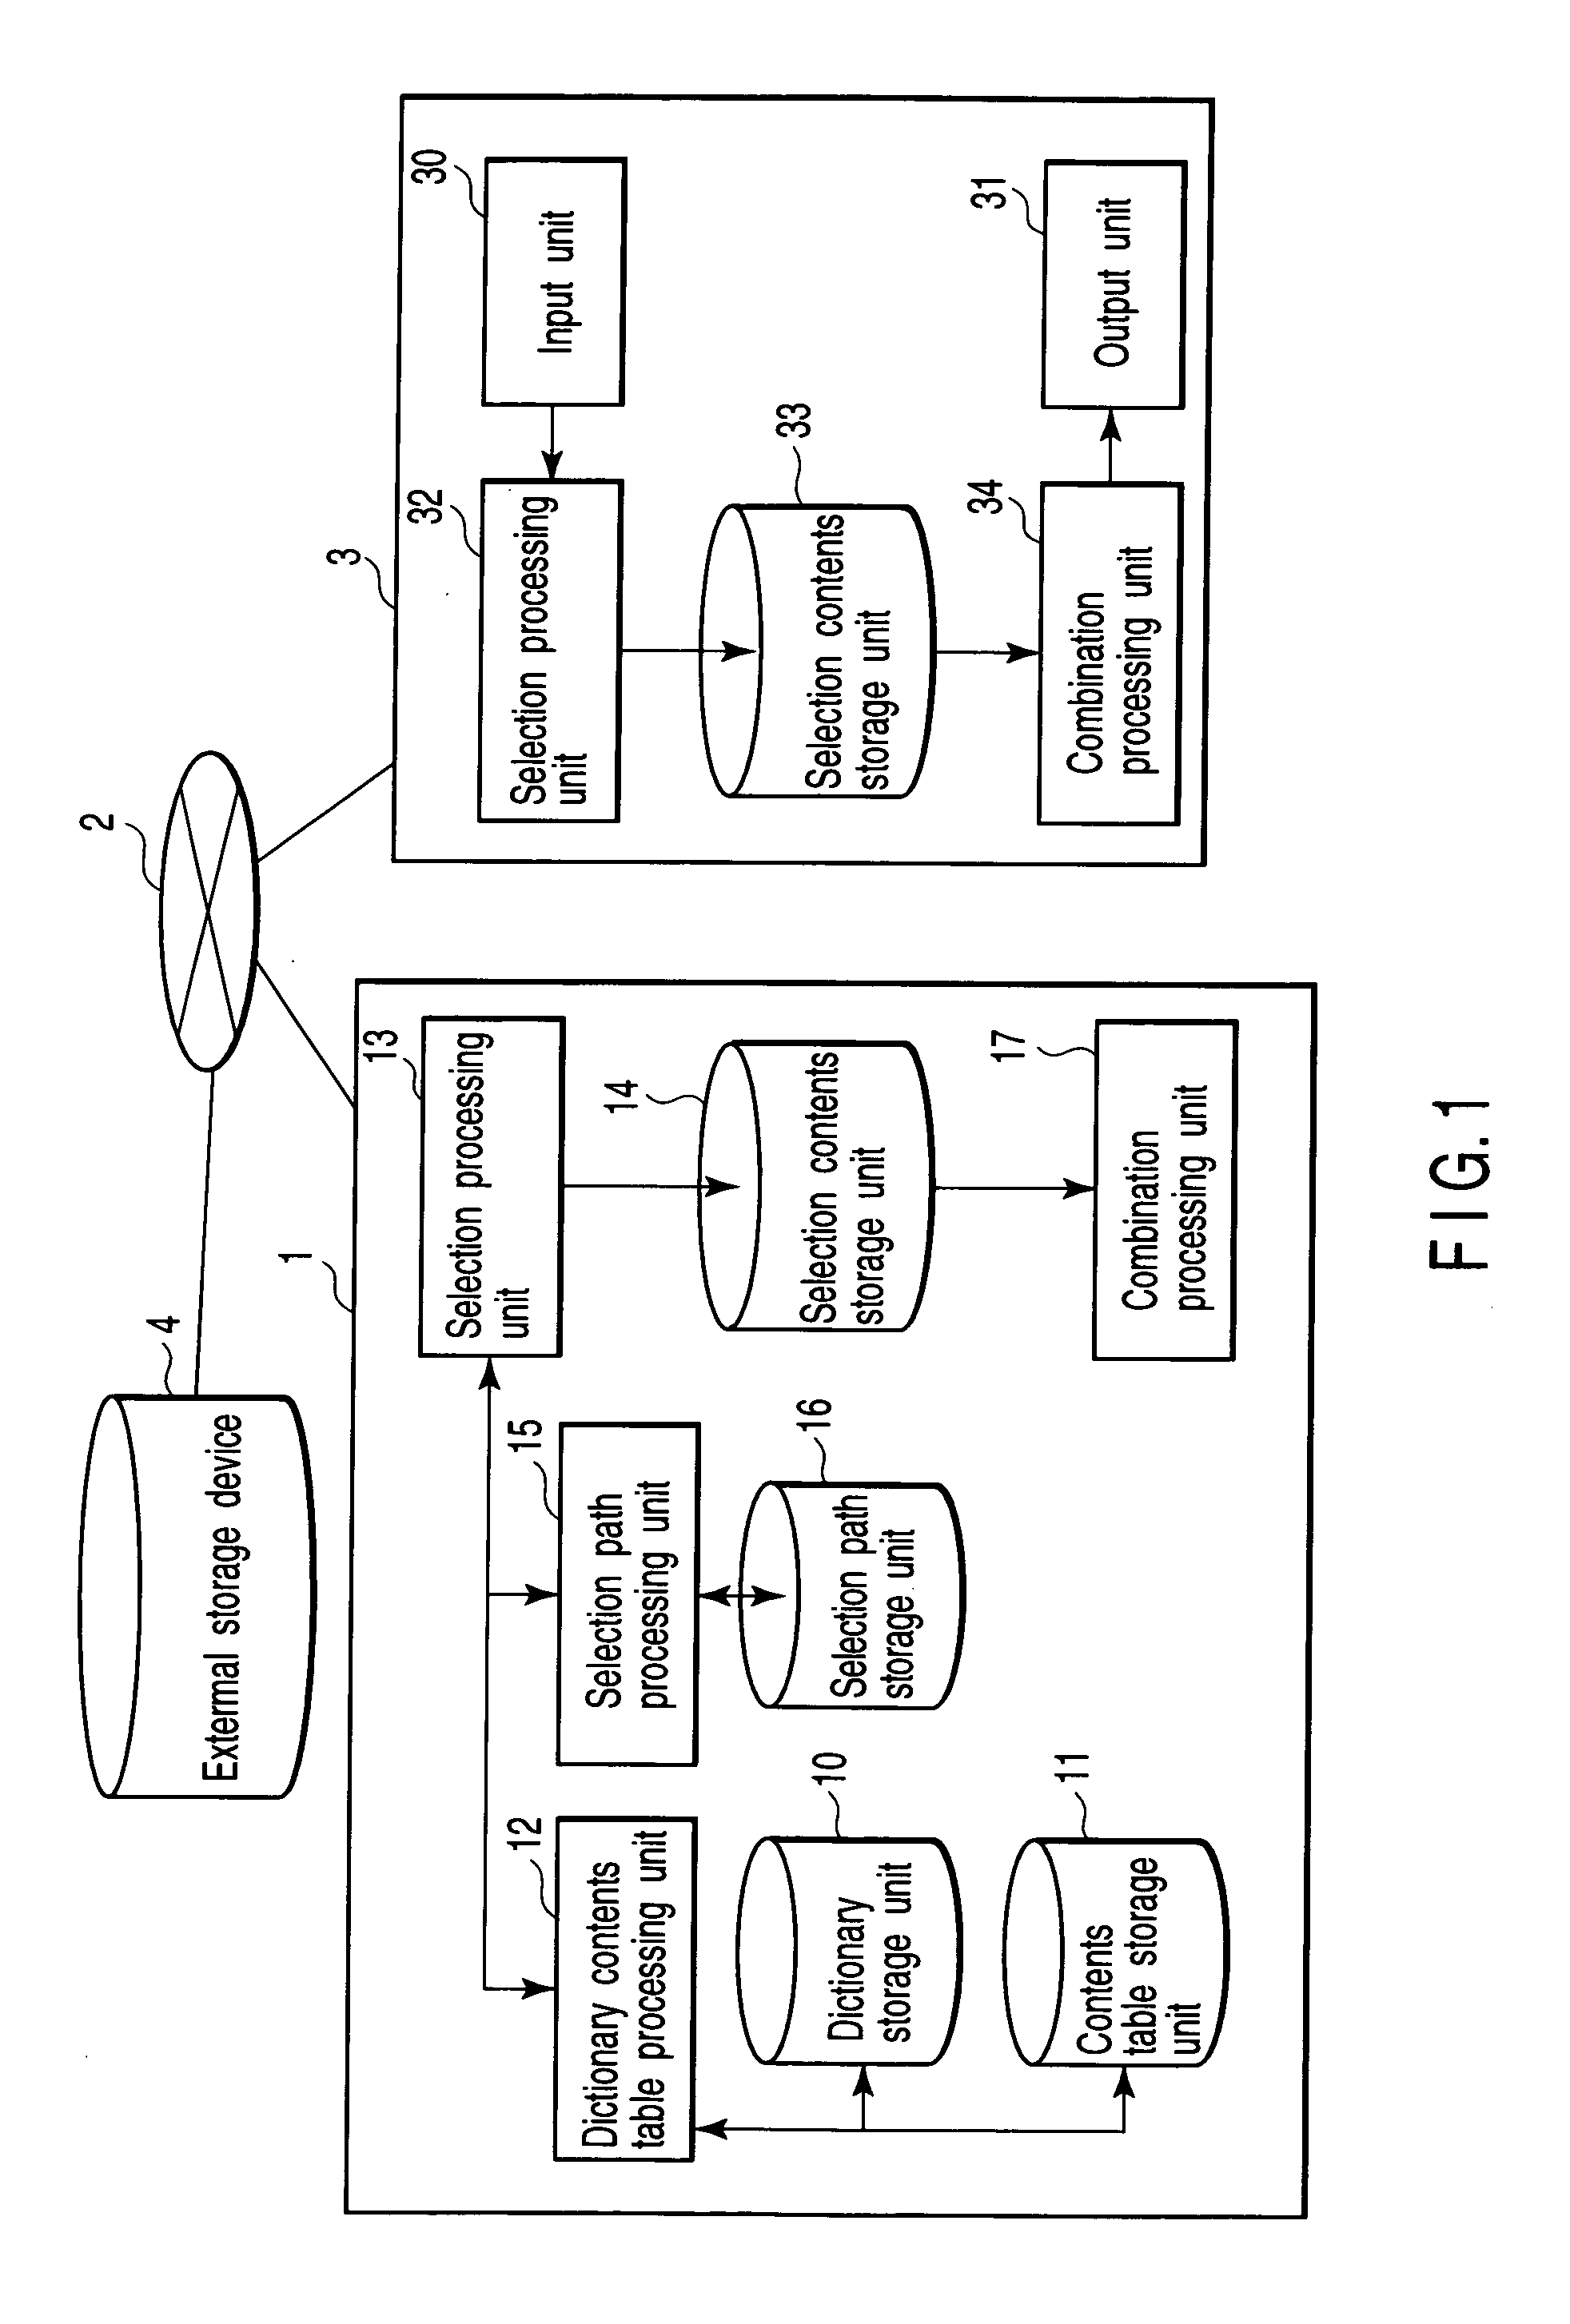 Hierarchical database apparatus, components selection method in hierarchical database, and components selection program